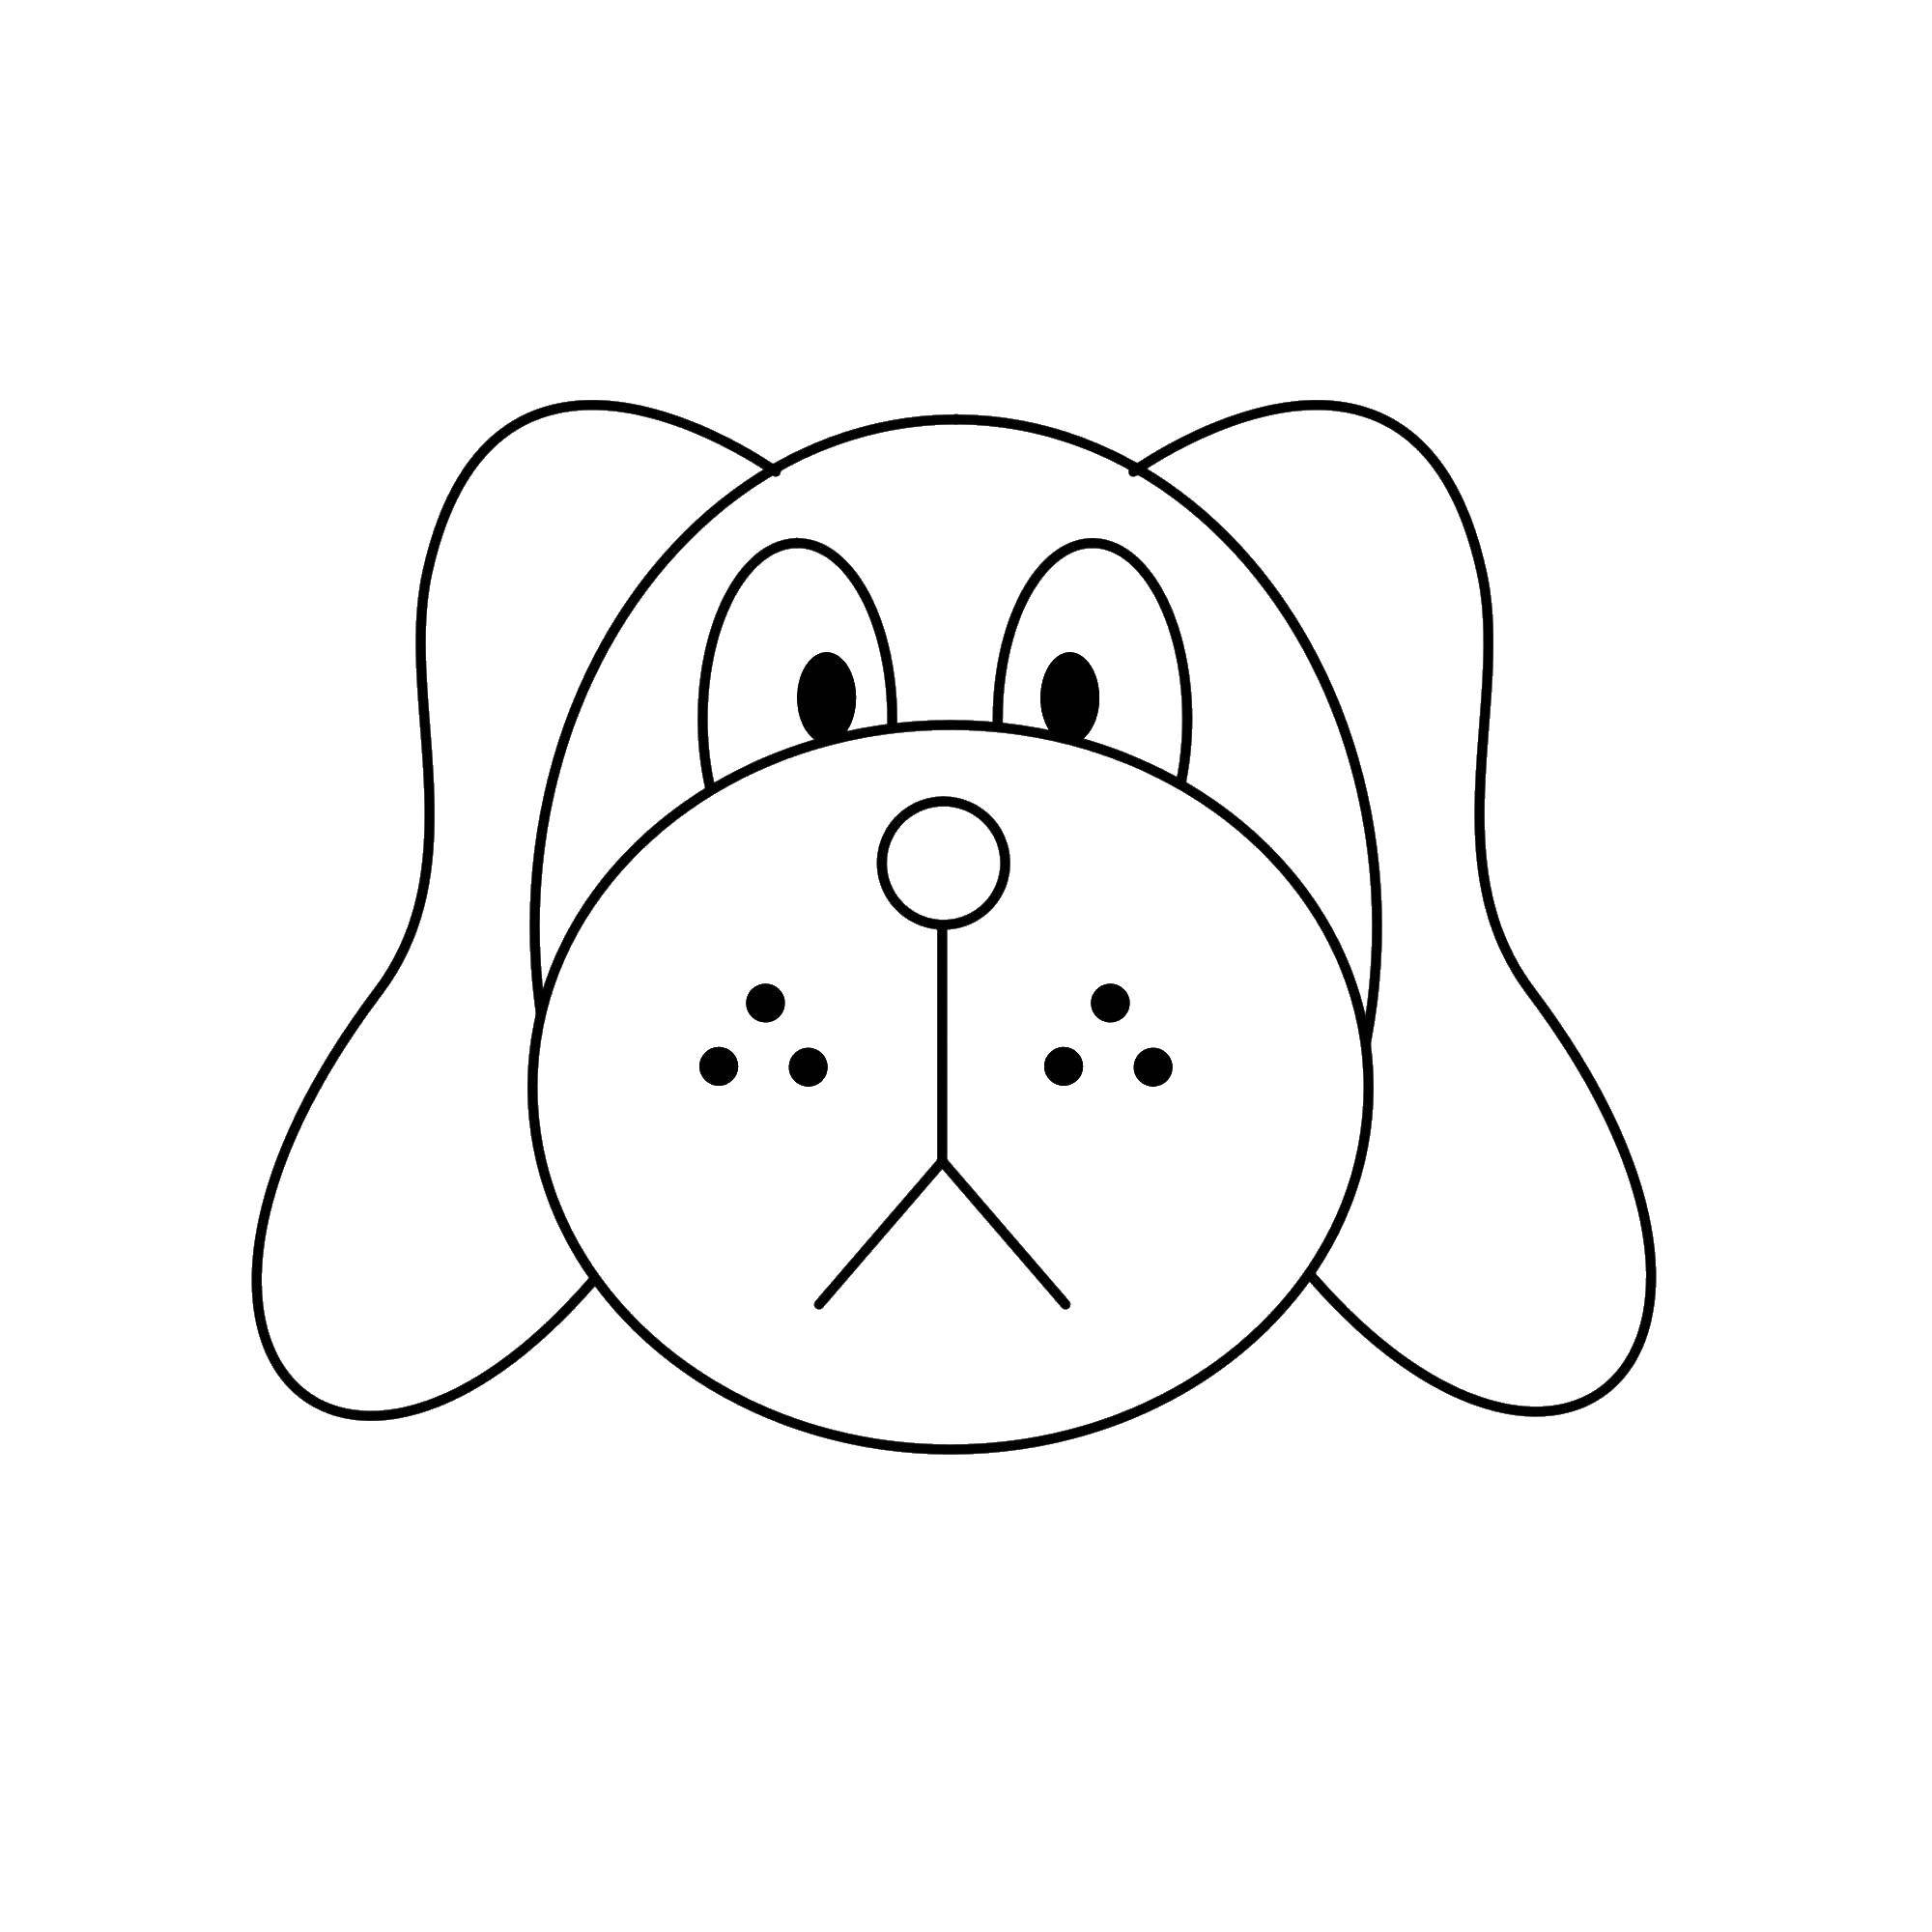 Coloring The angry face. Category simple coloring. Tags:  Animals, dog.